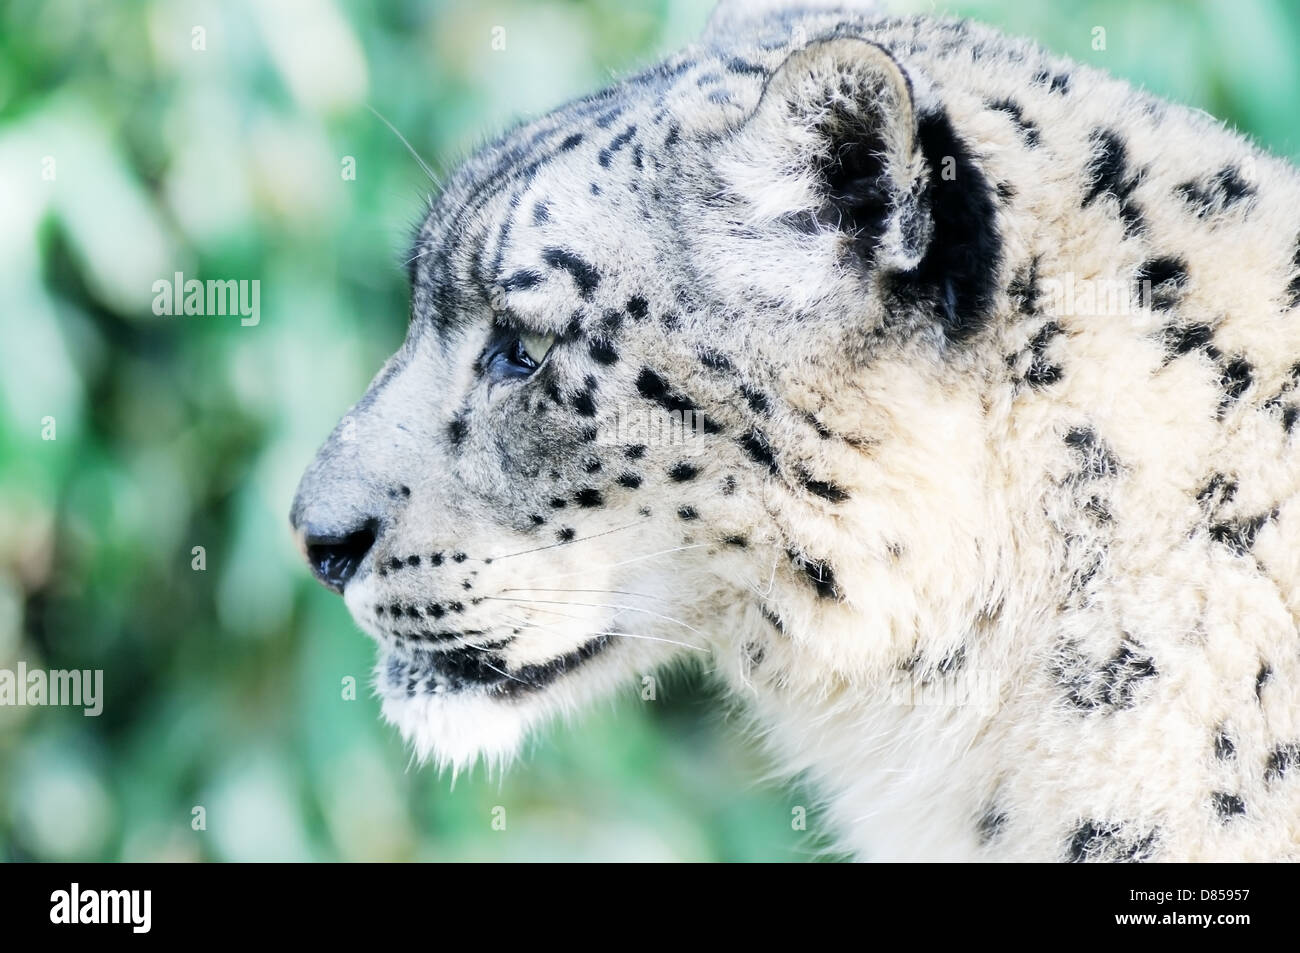 Closeup of snow leopard face and head with fur detail Stock Photo